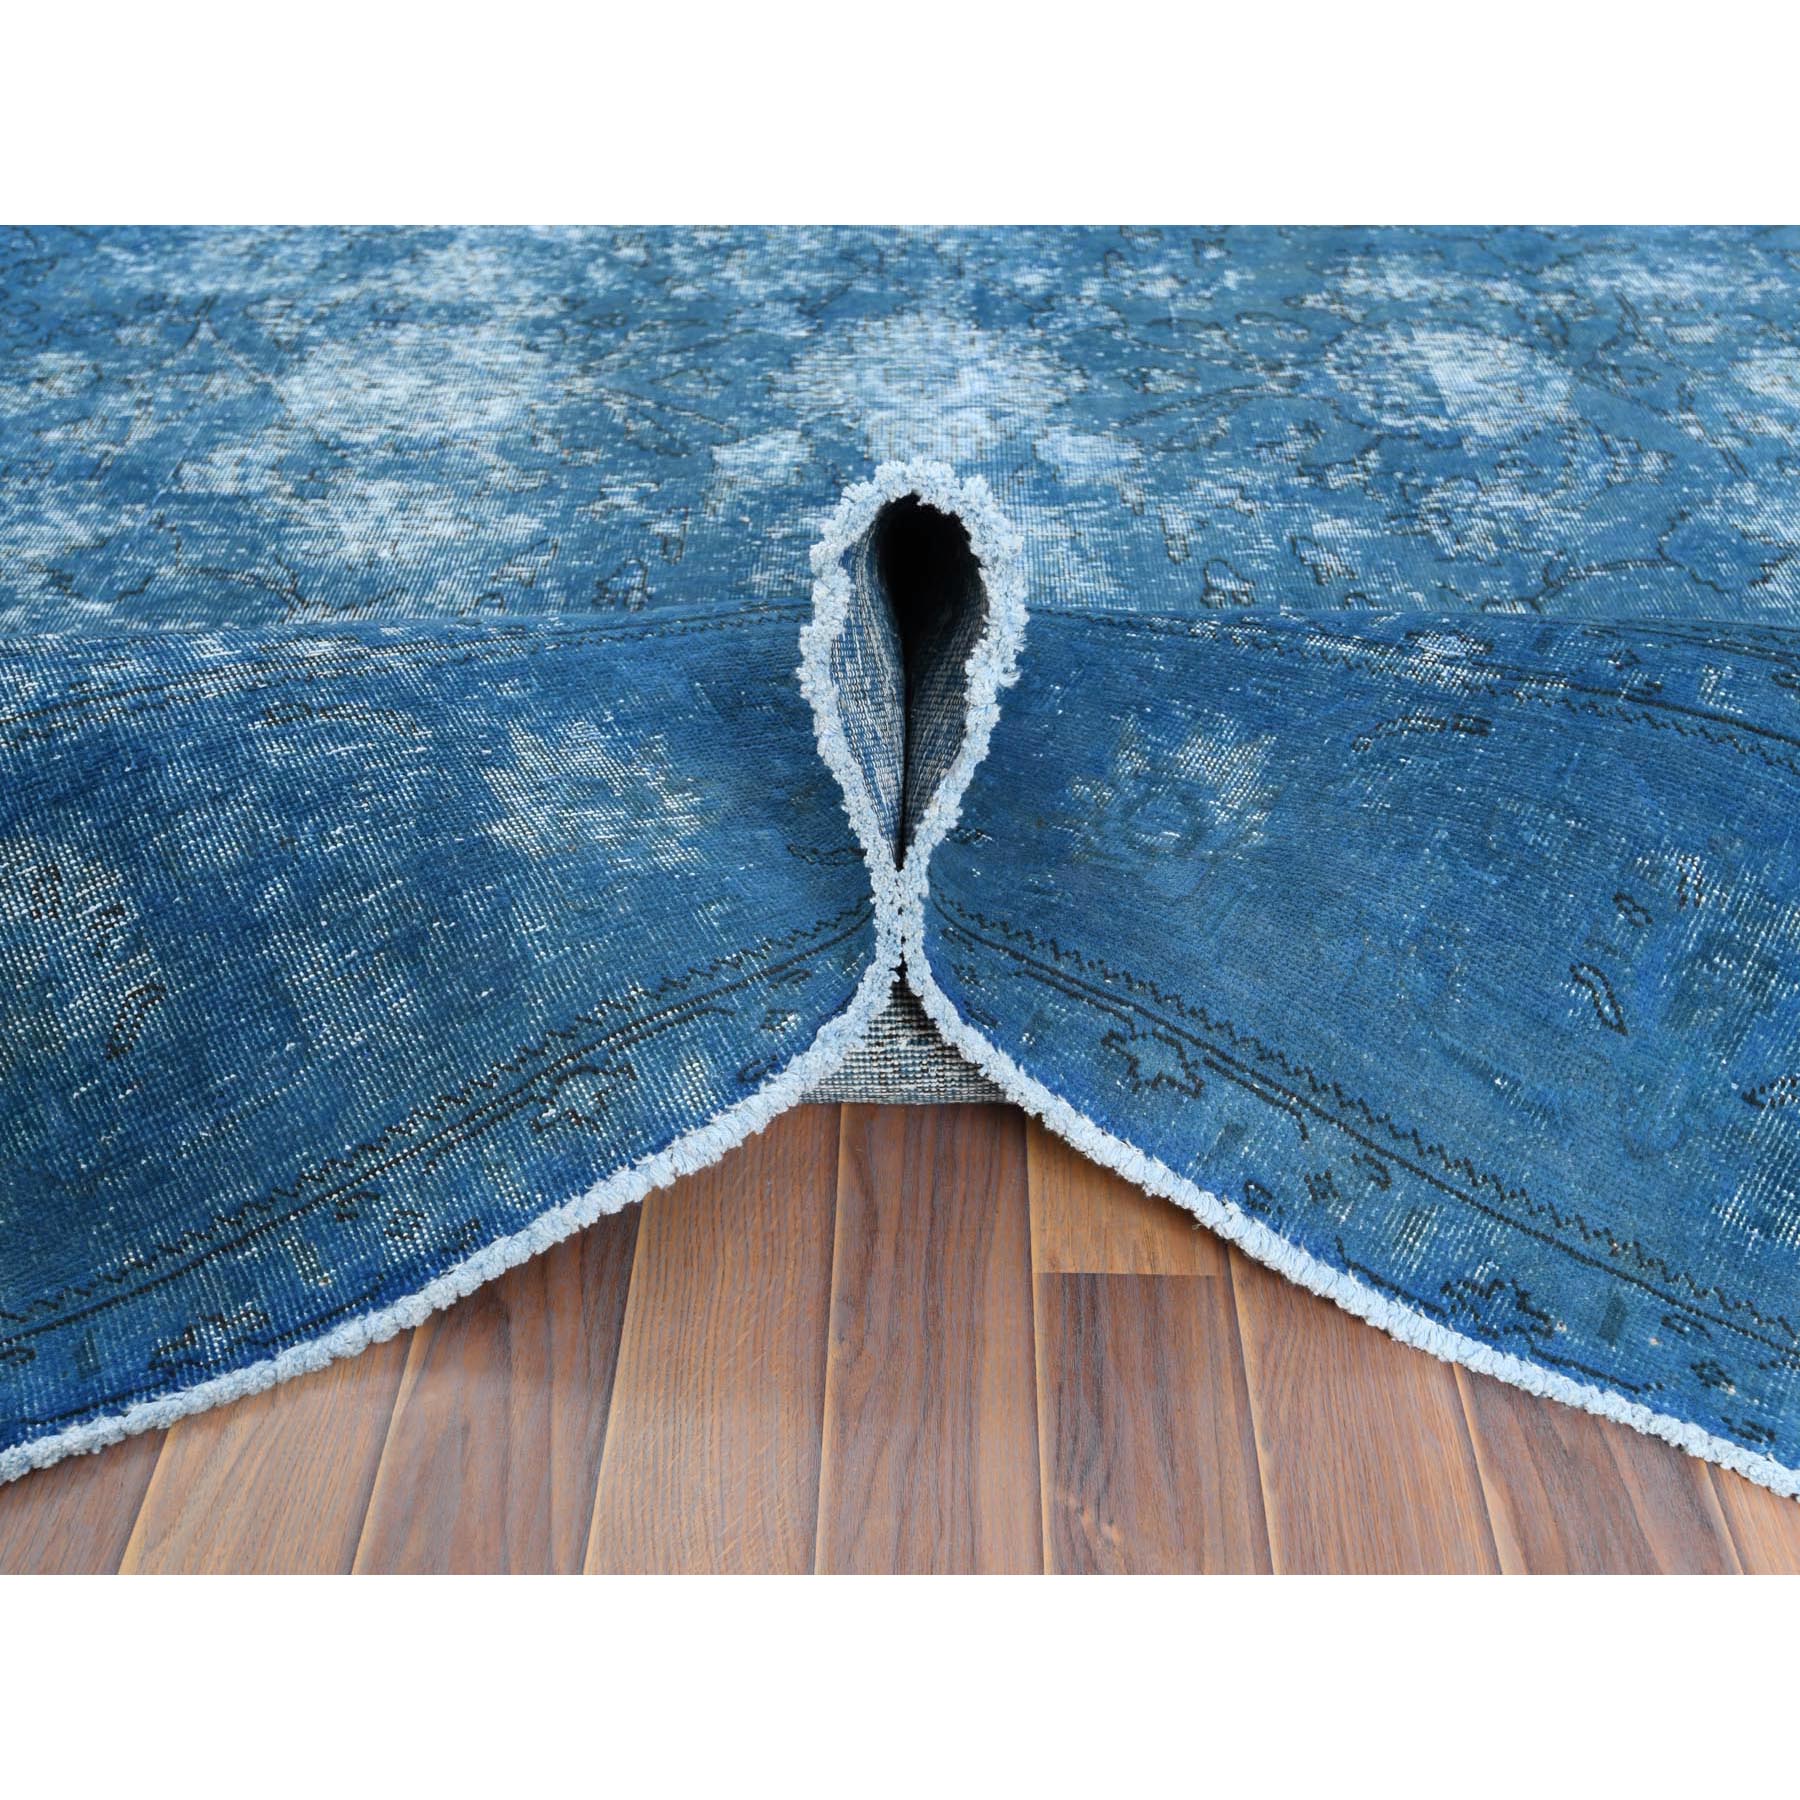 9'8"x10'10" Blue Vintage Overdyed Persian Tabriz Distressed Worn Wool Shaved Down Hand Woven Squarish Oriental Rug 